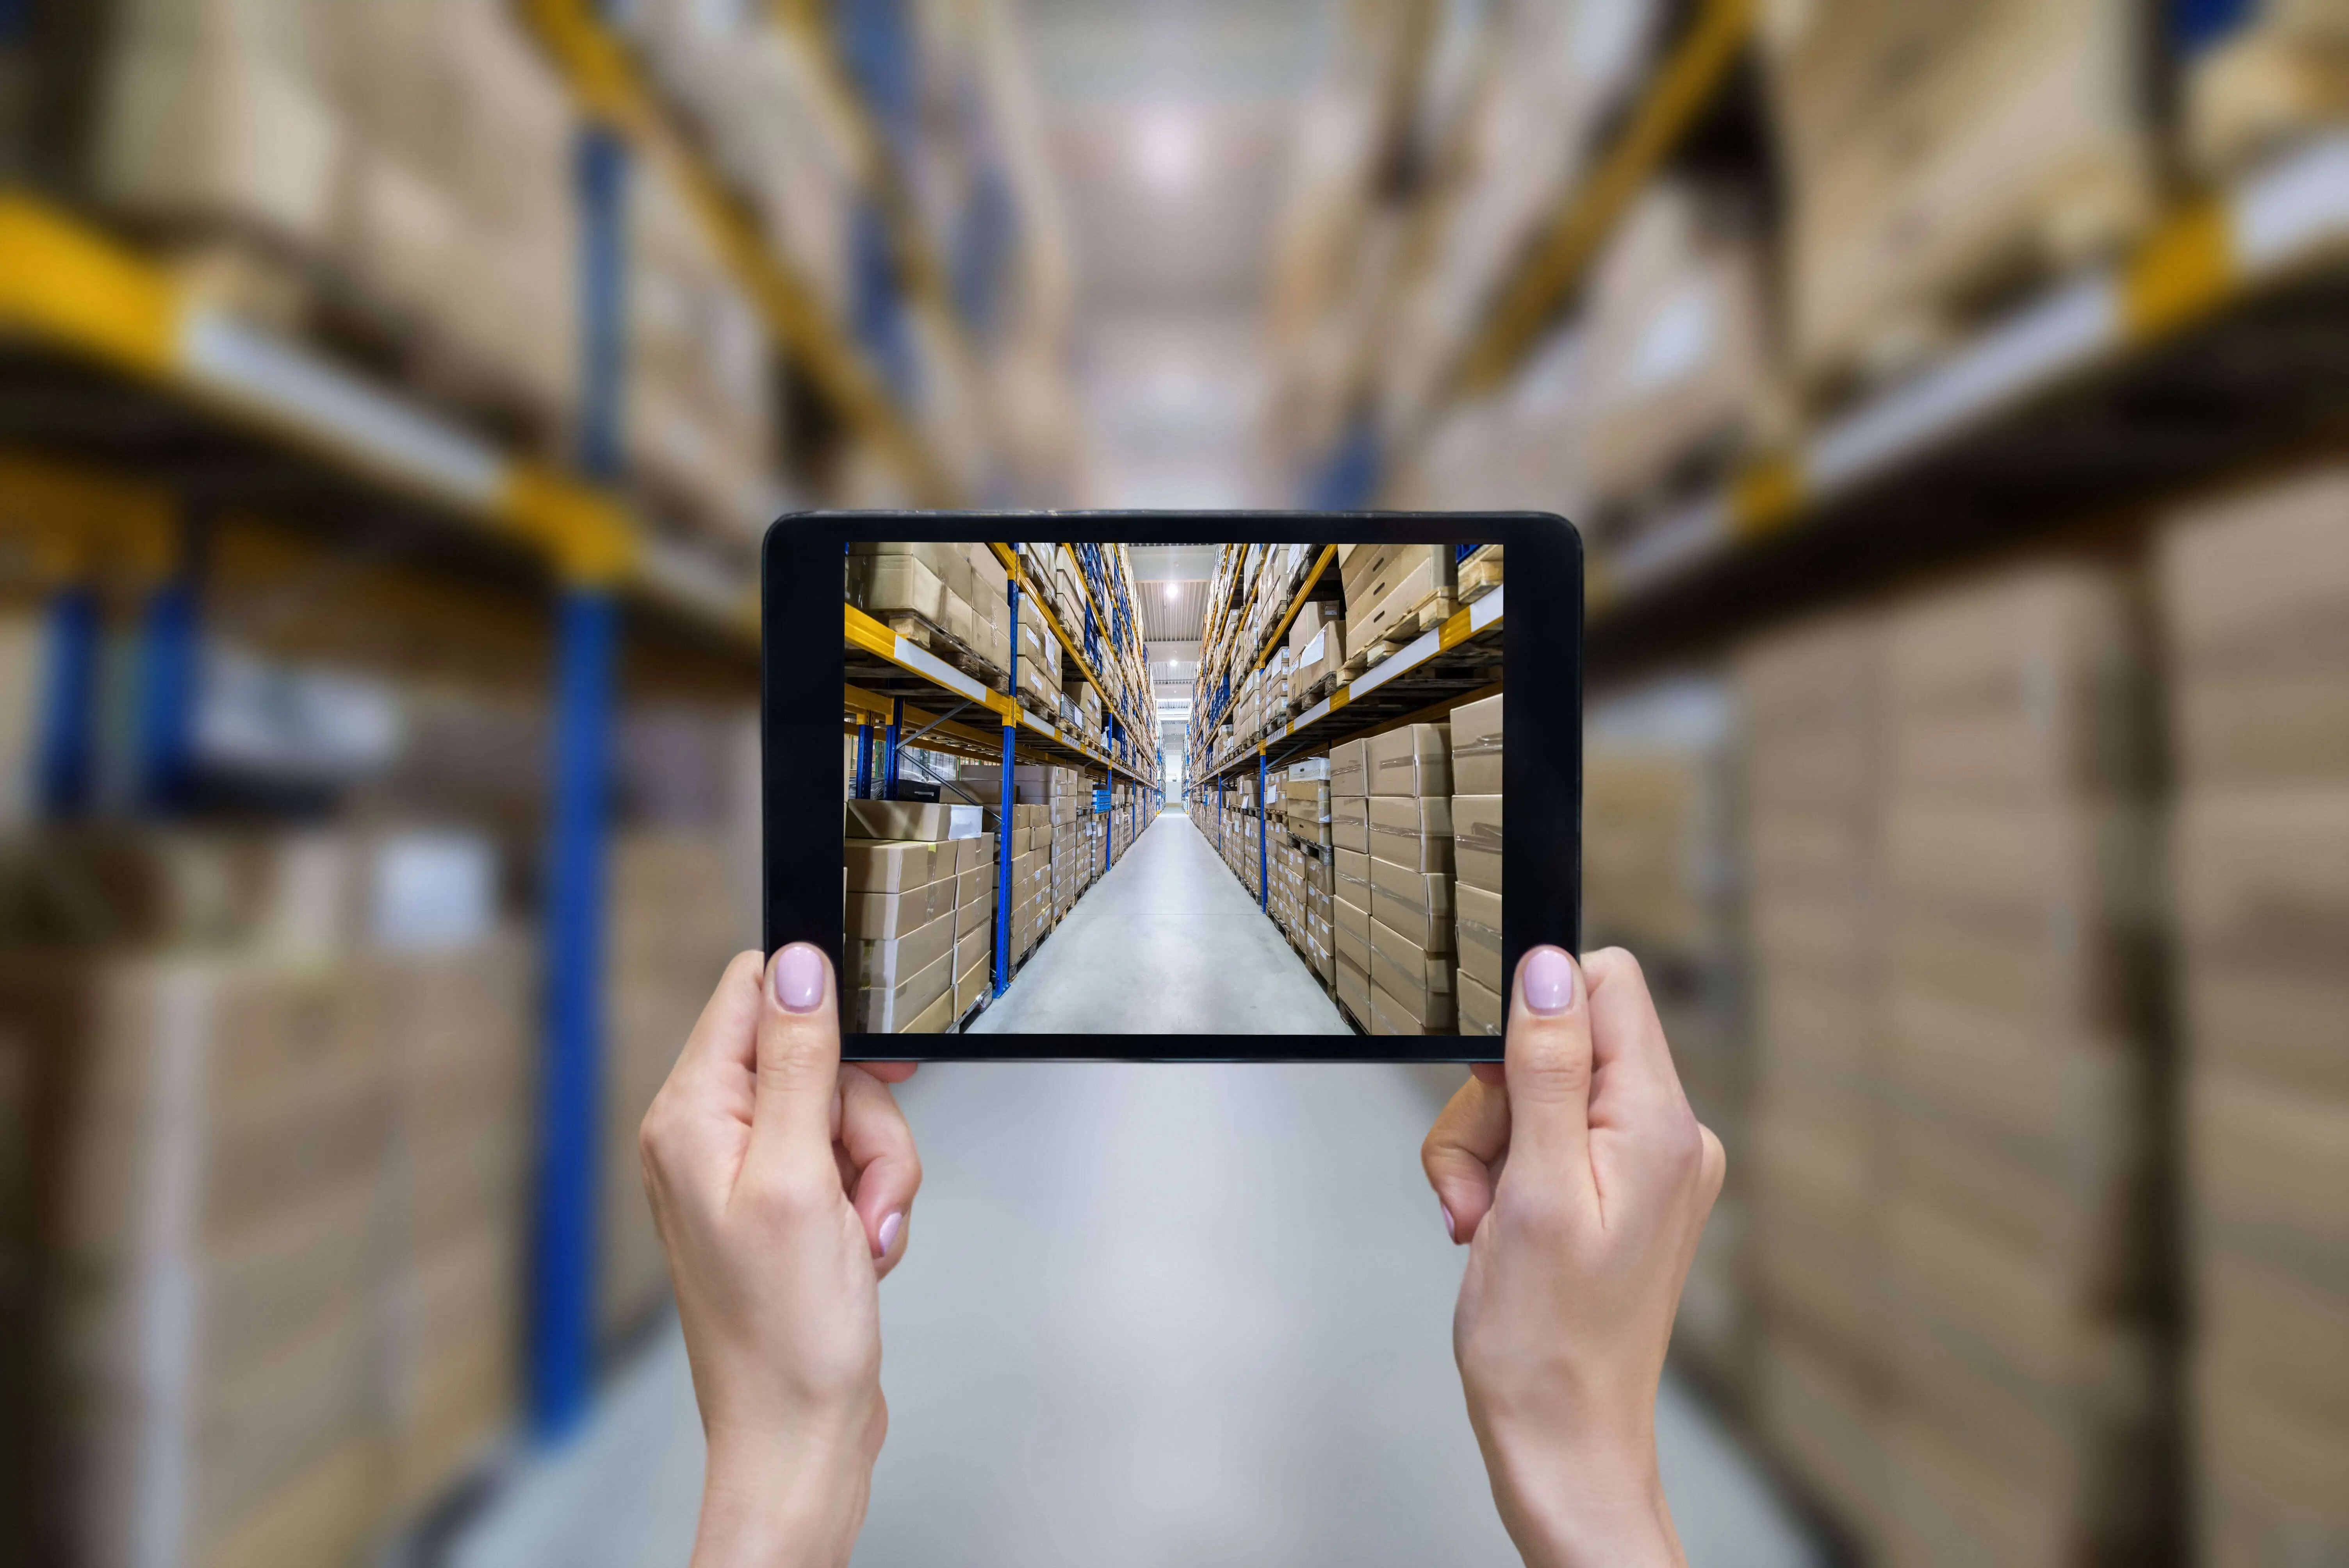 looking at a warehouse through the screen of a tablet